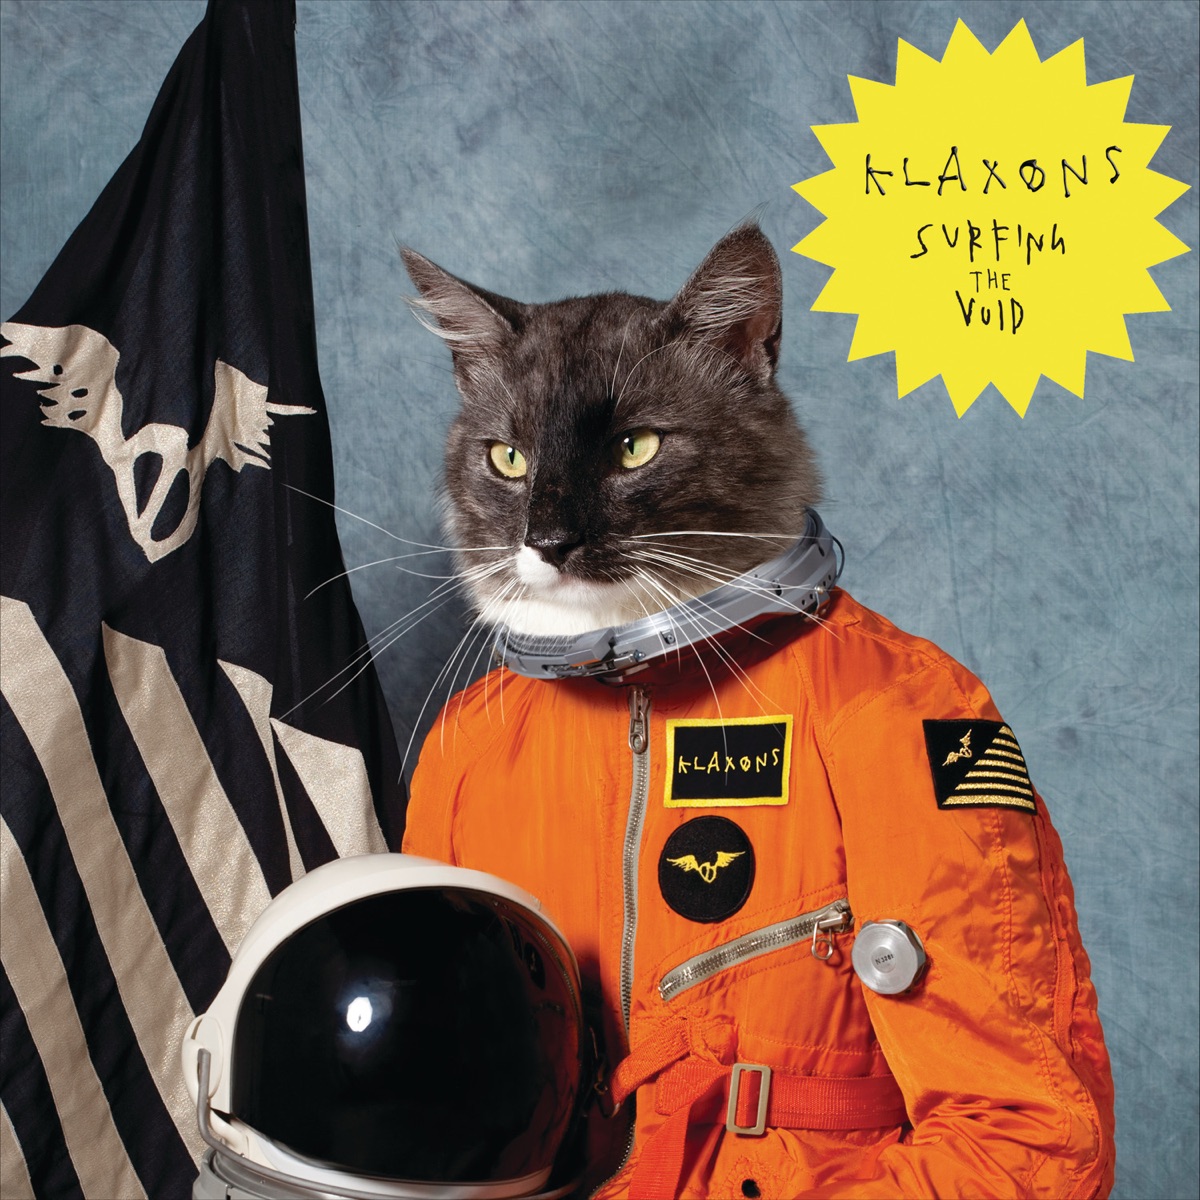 Klaxons Surfing the Void cover artwork